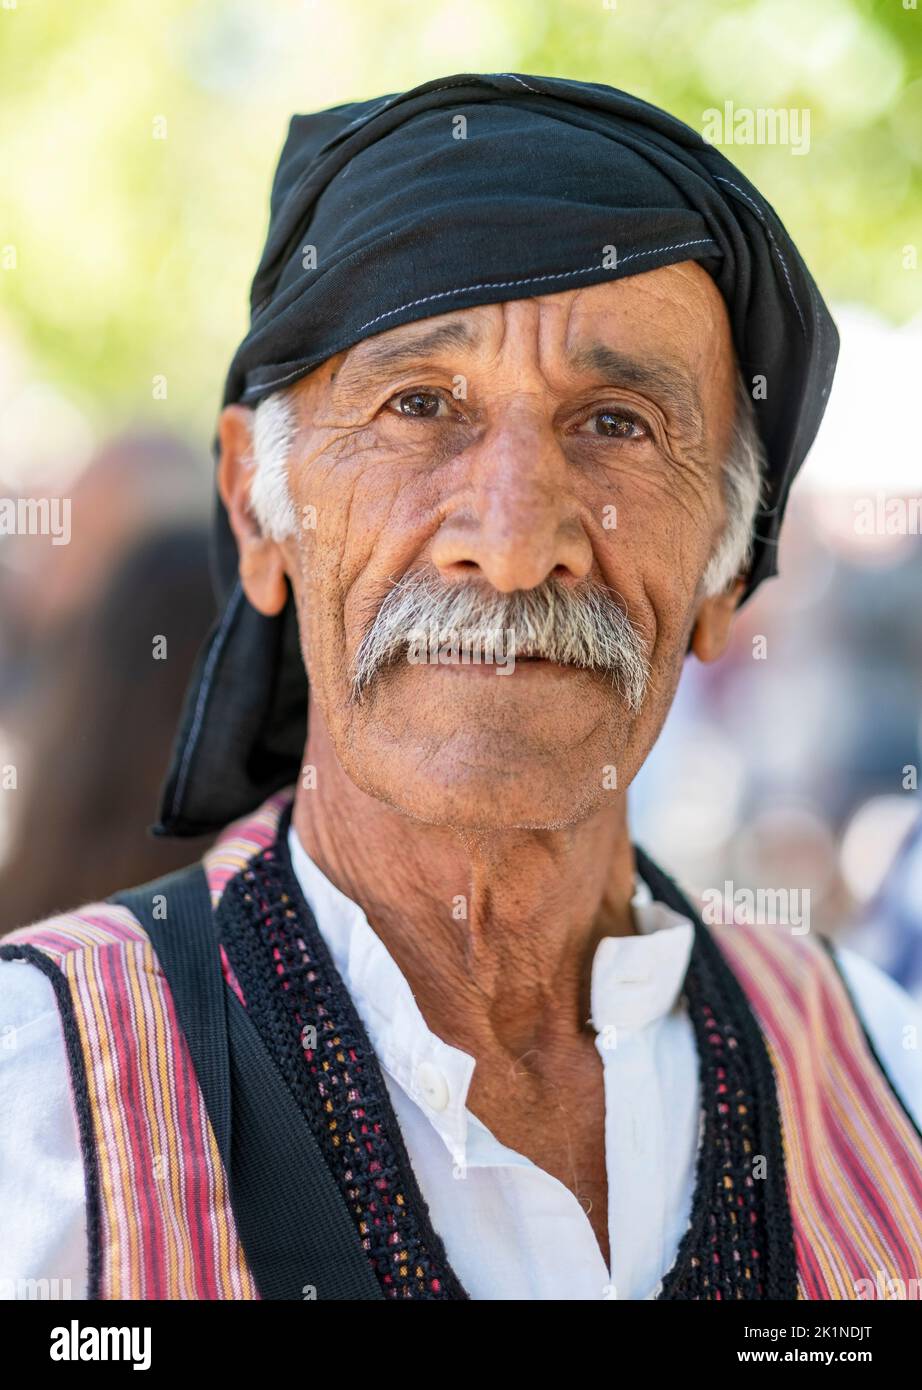 Portrait of a Cypriot man in traditional dress at the Statos-Agios Fotios Rural Festival, Paphos region, Cyprus. Stock Photo